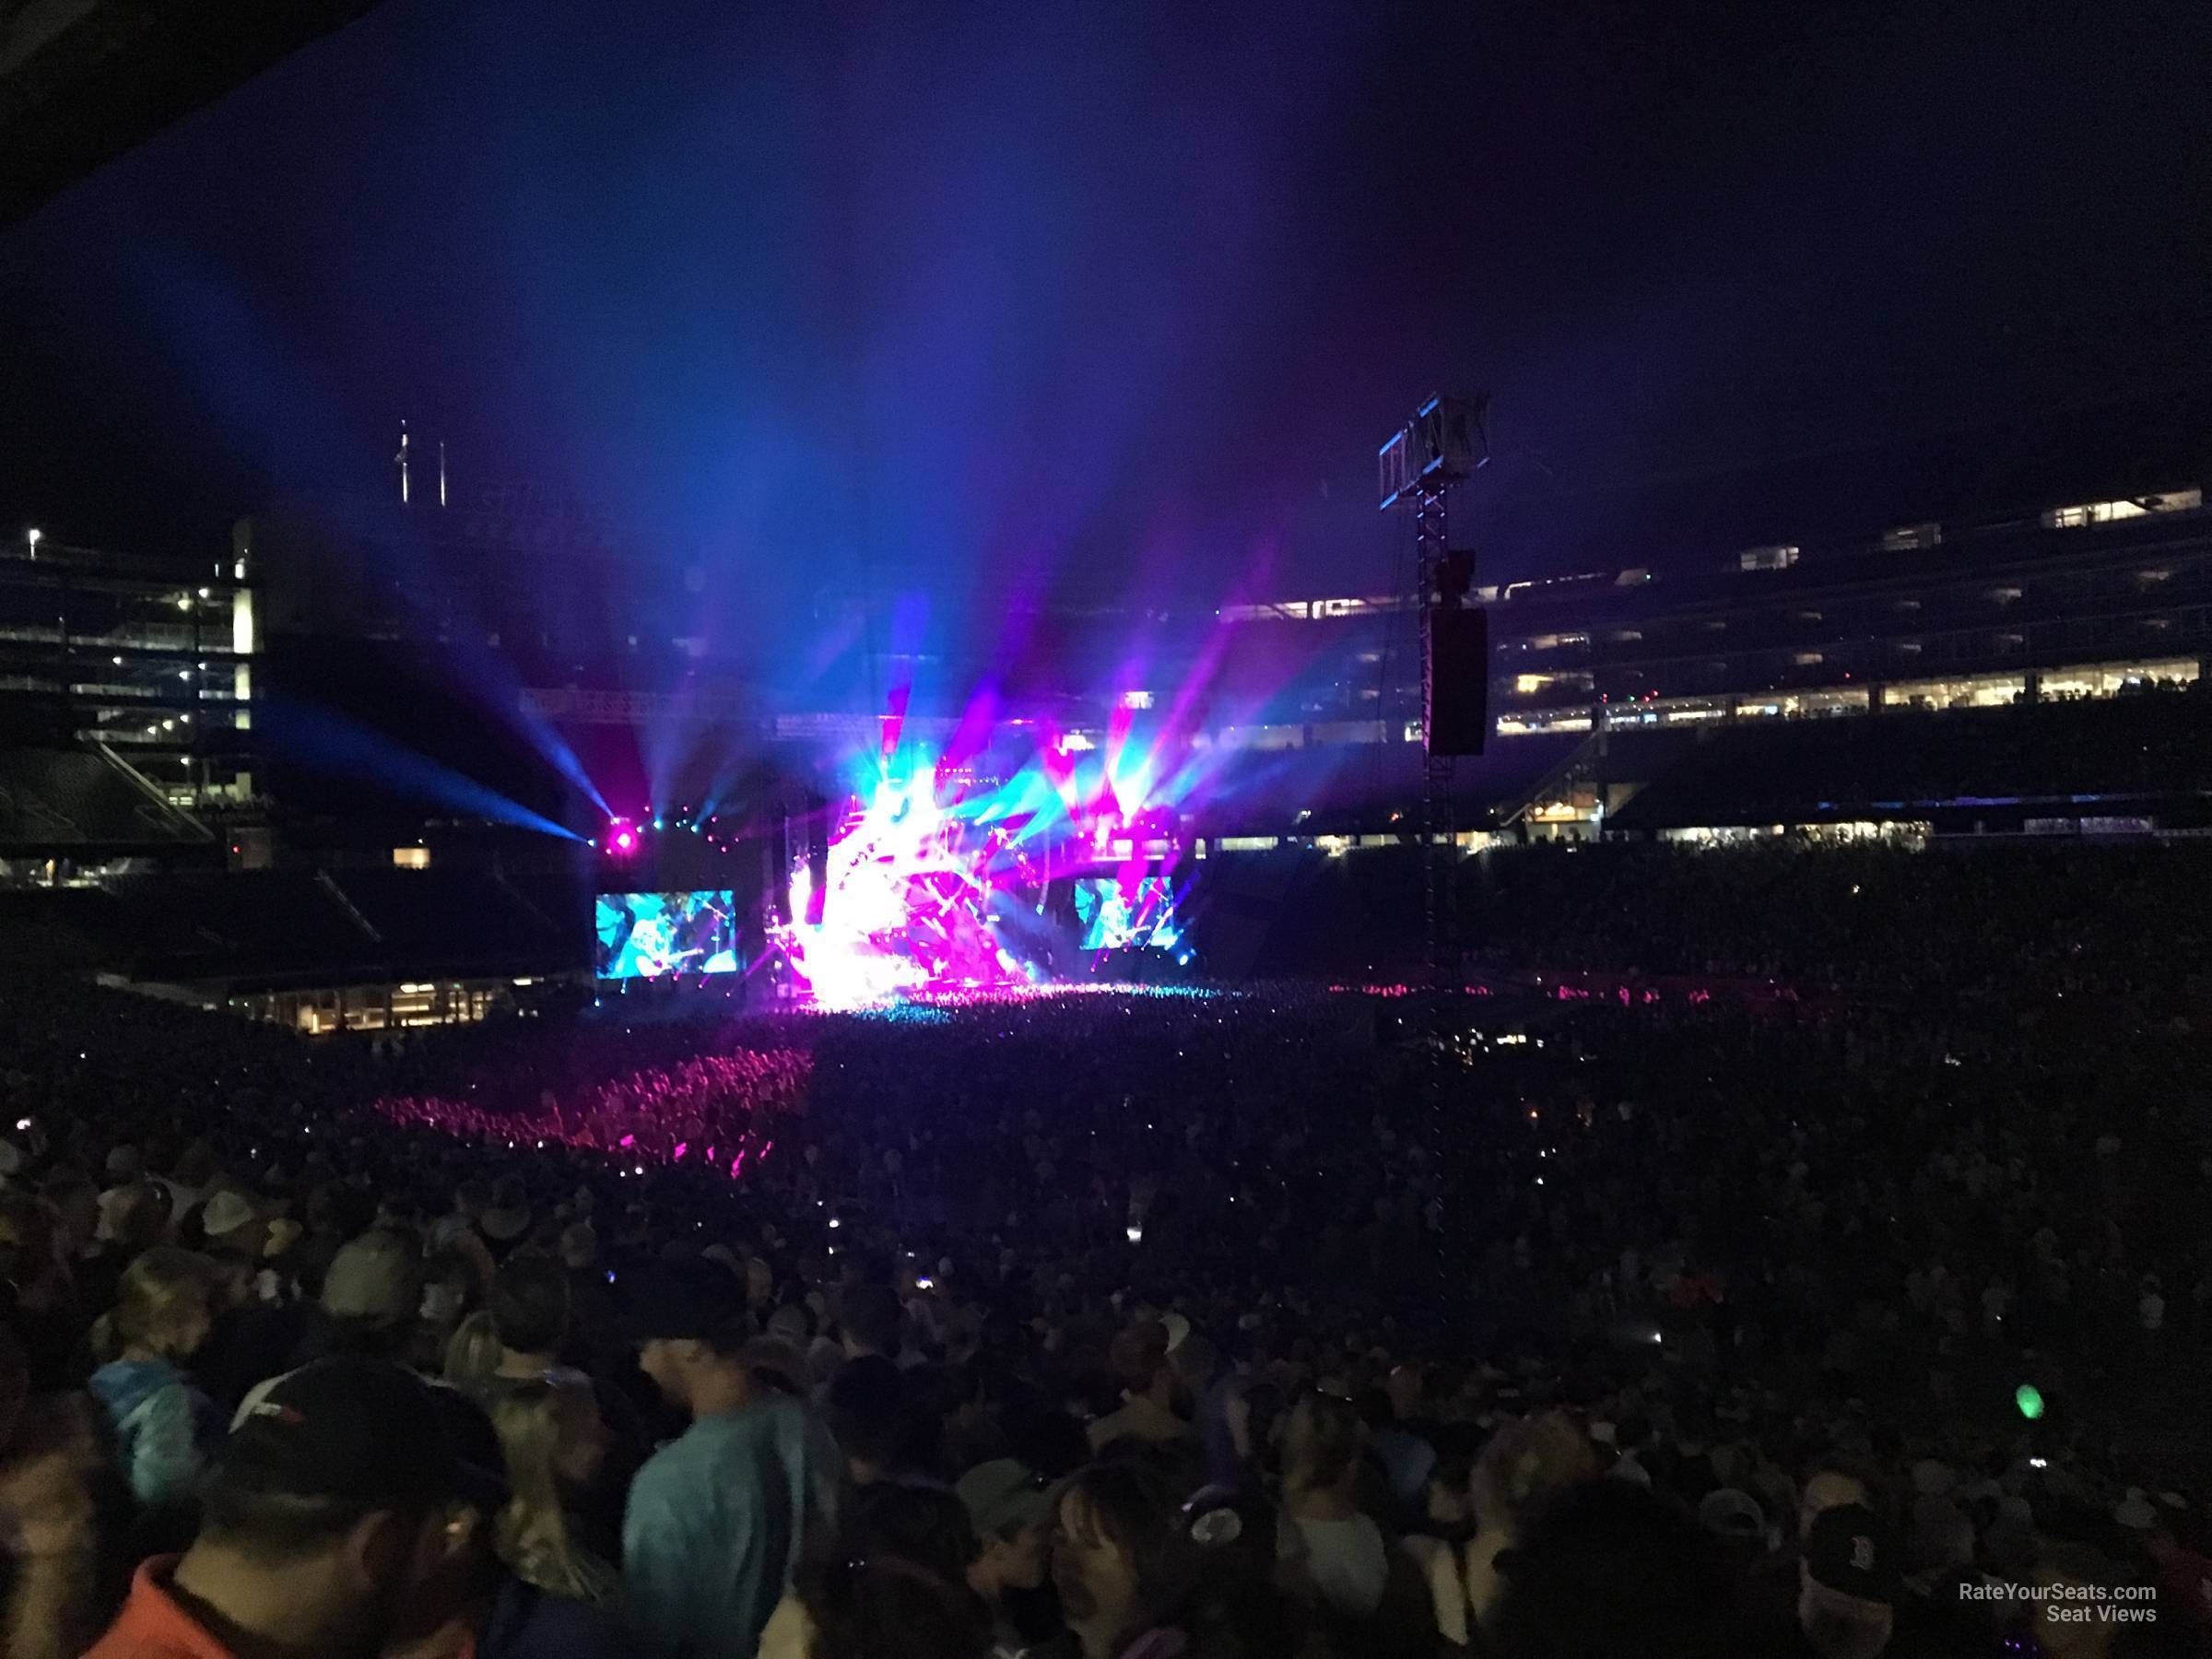 section 105, row 38 seat view  for concert - gillette stadium